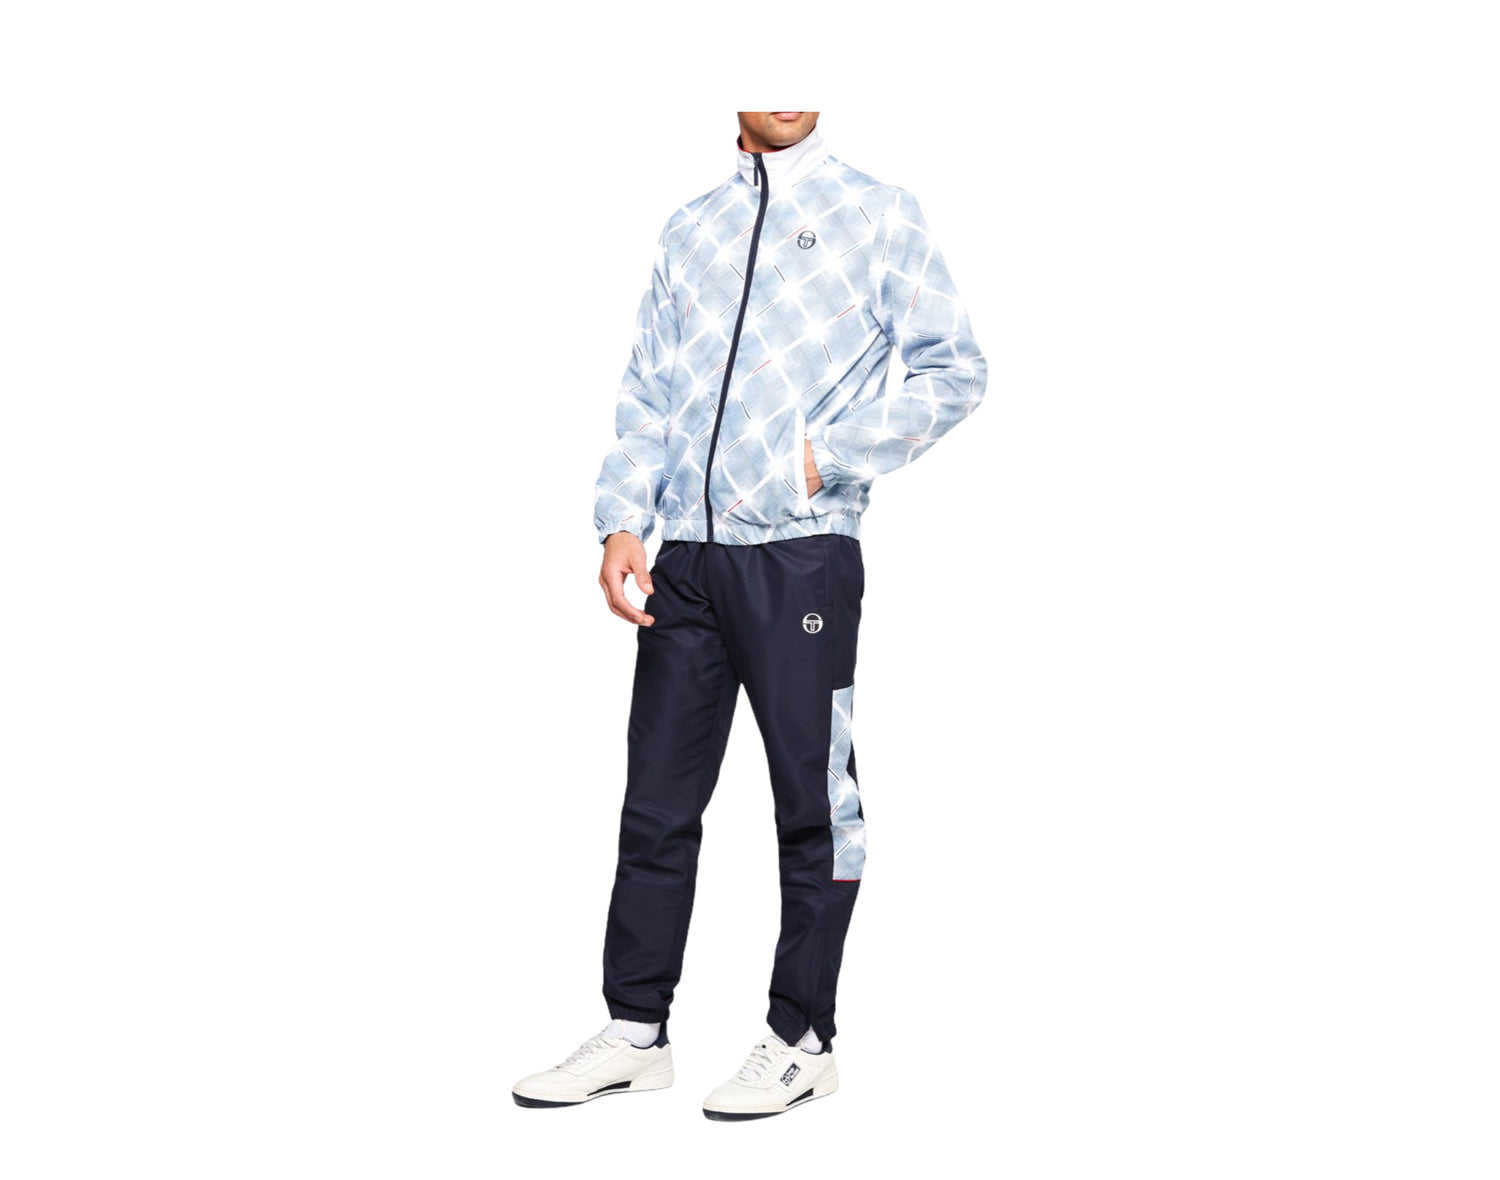 Sergio Tacchini Nonsentric Tracksuit - Top and Bottom